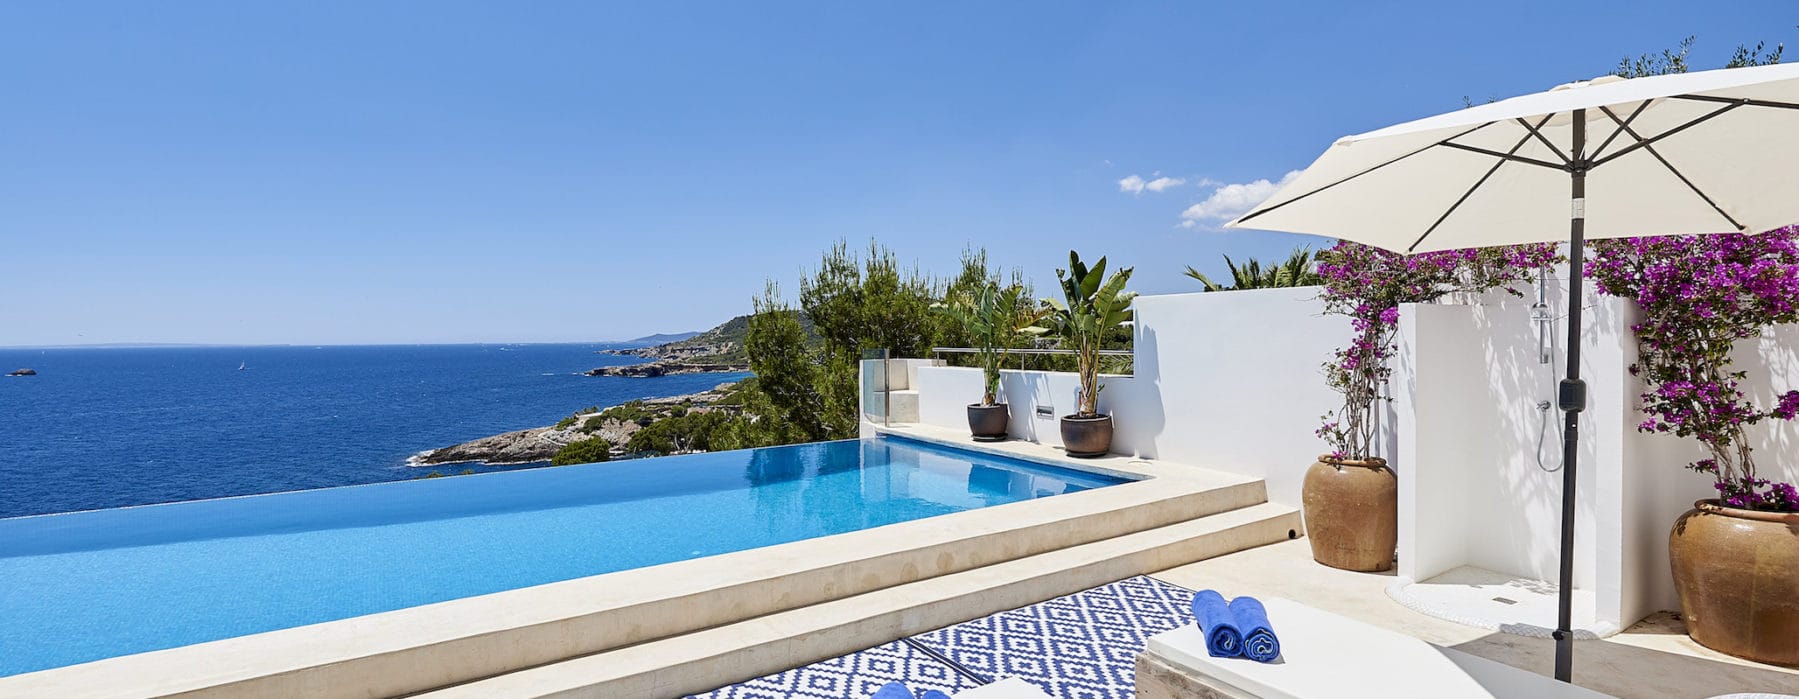 Infinity pool with sun loungers and magnificent view to sea and coast